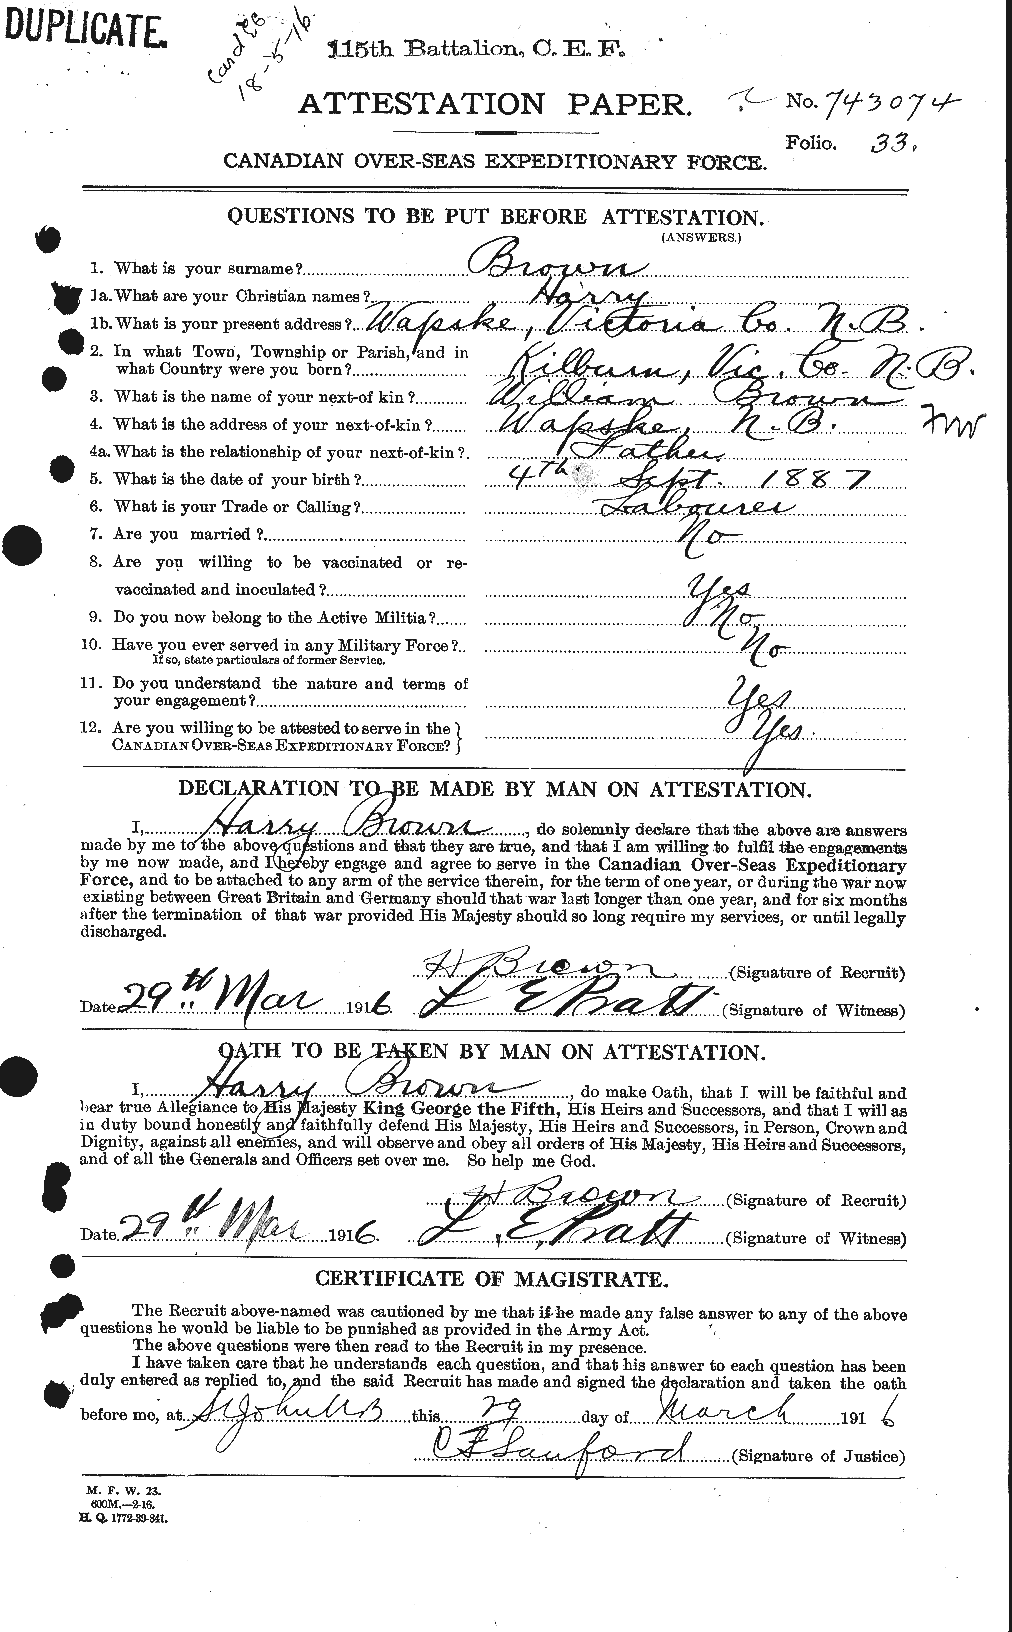 Personnel Records of the First World War - CEF 265392a